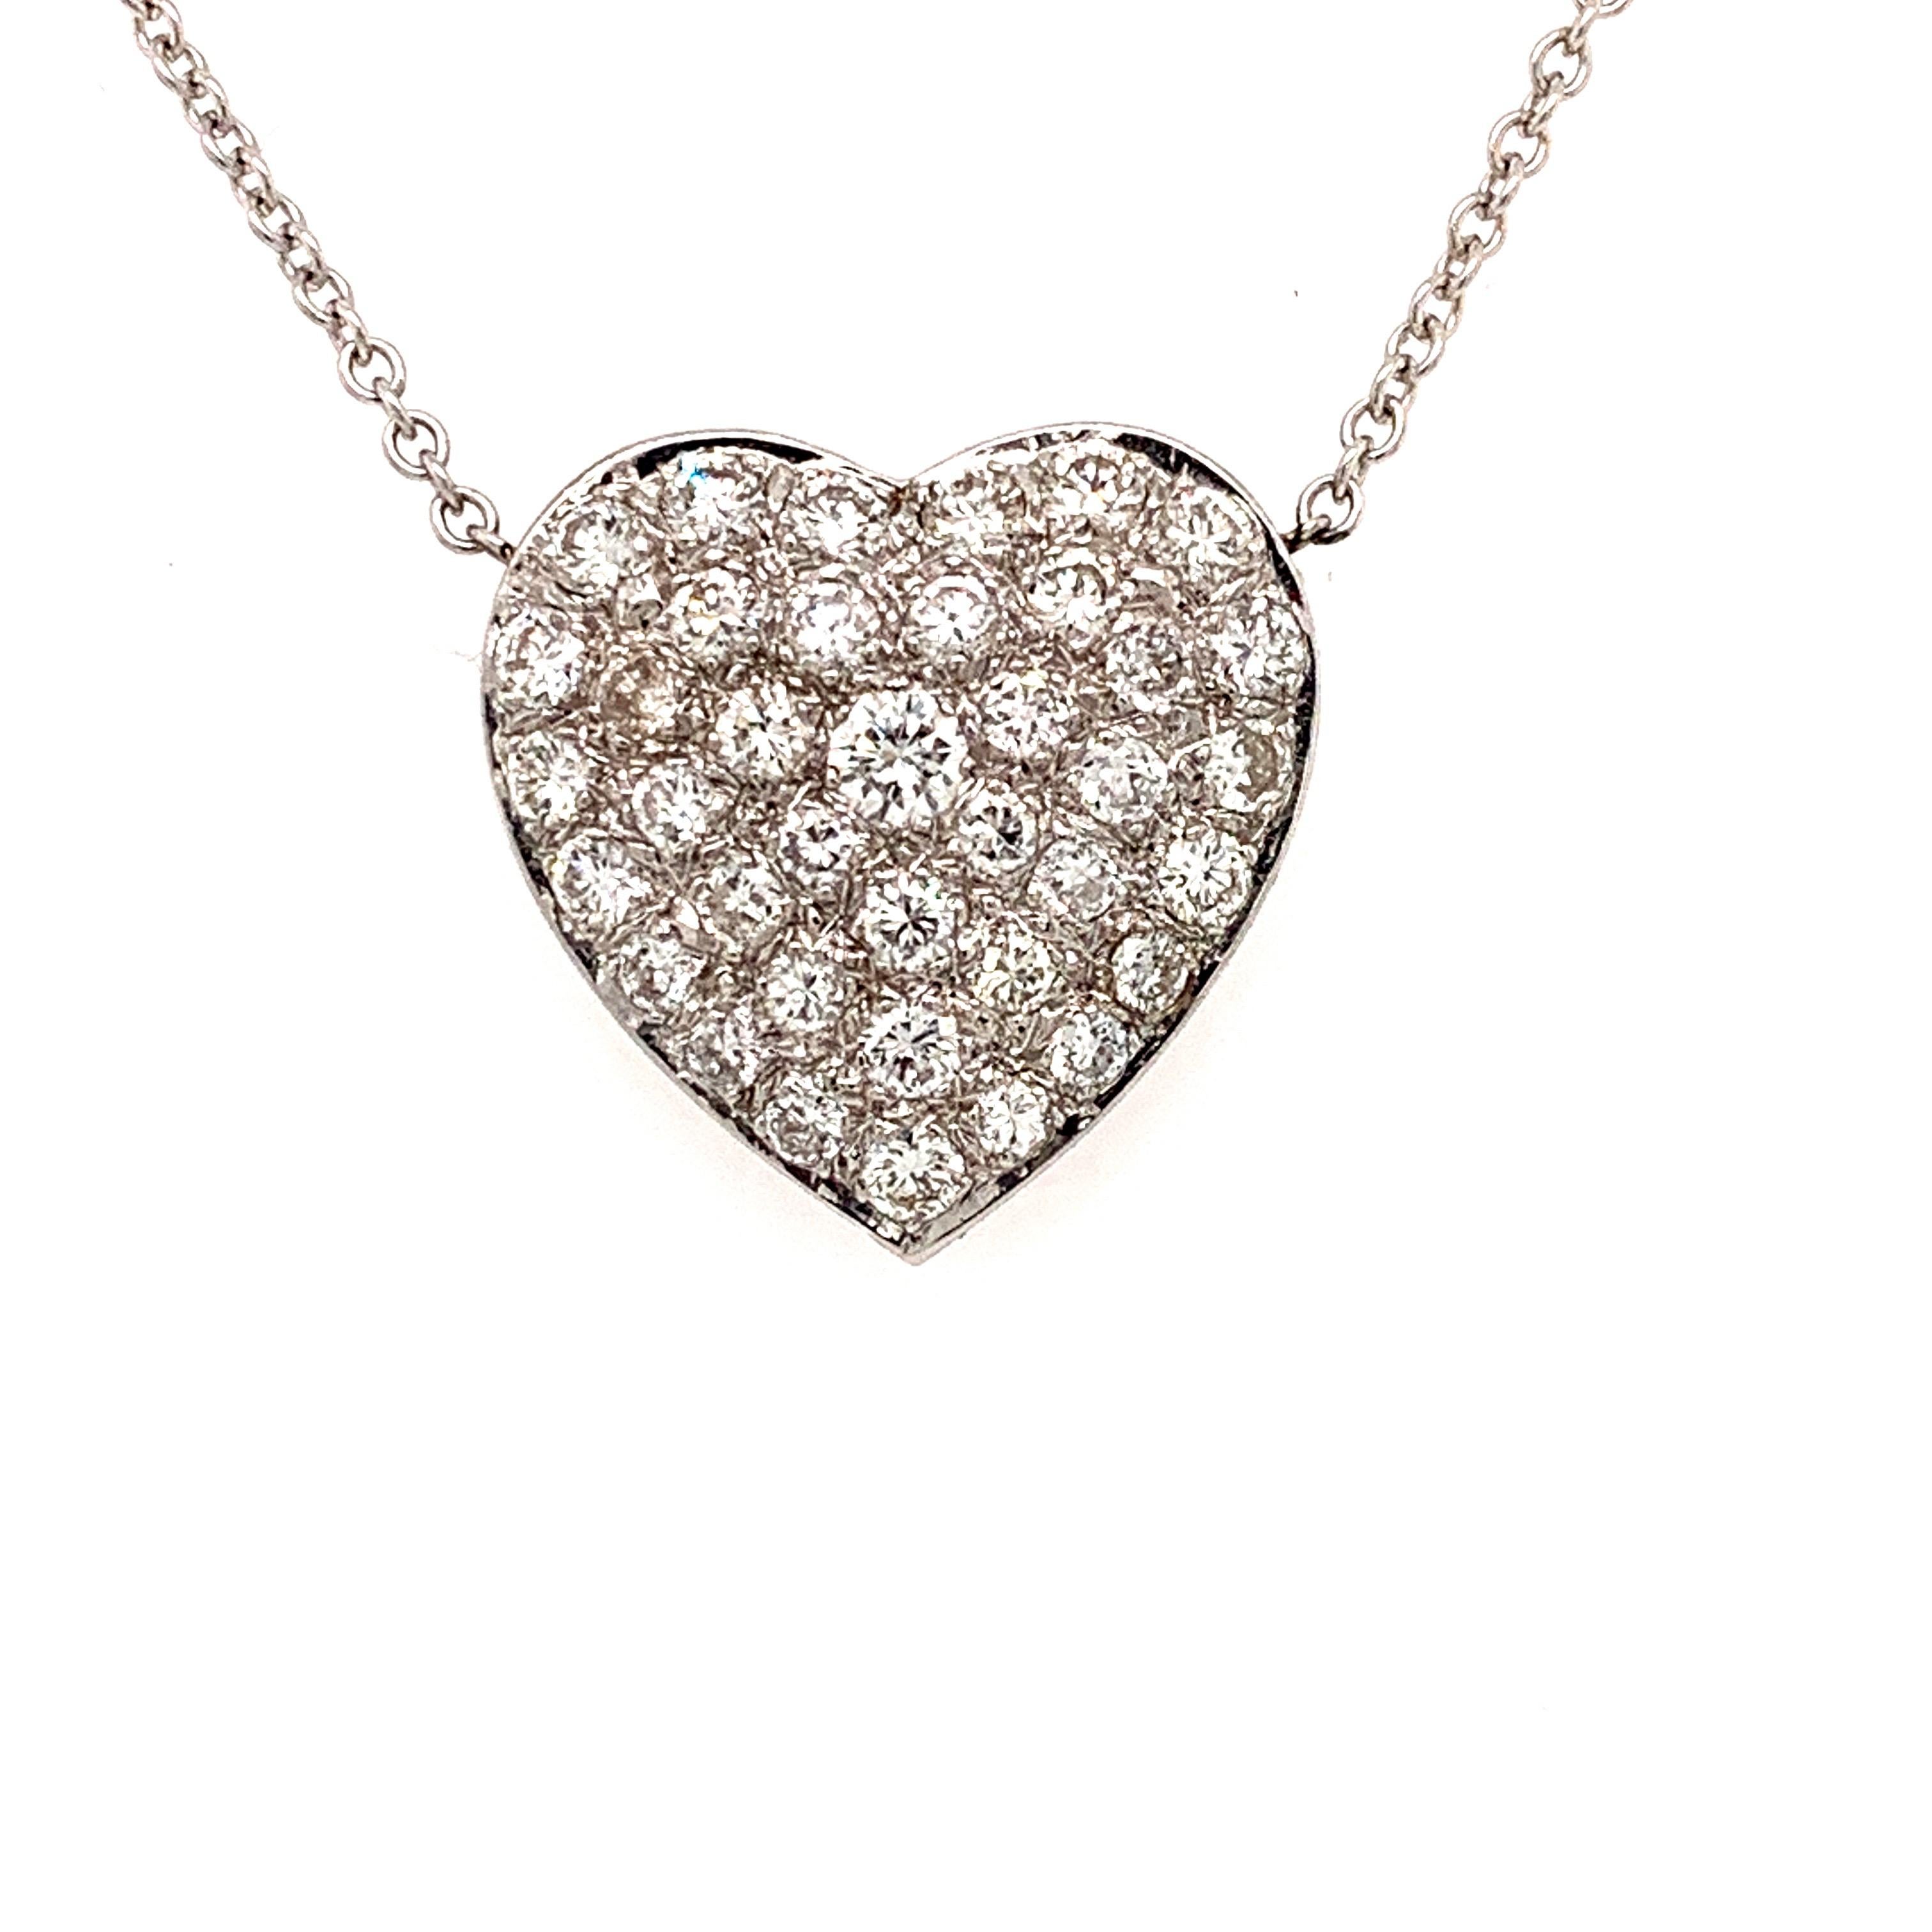 This shimmering pendant necklace in heart shaped design. set with over four carats of ideal cut round brilliant diamonds F-G color VS clarity.
Incredible craftsmanship is noticeable throughout, allowing for the maximum brilliance of these incredible